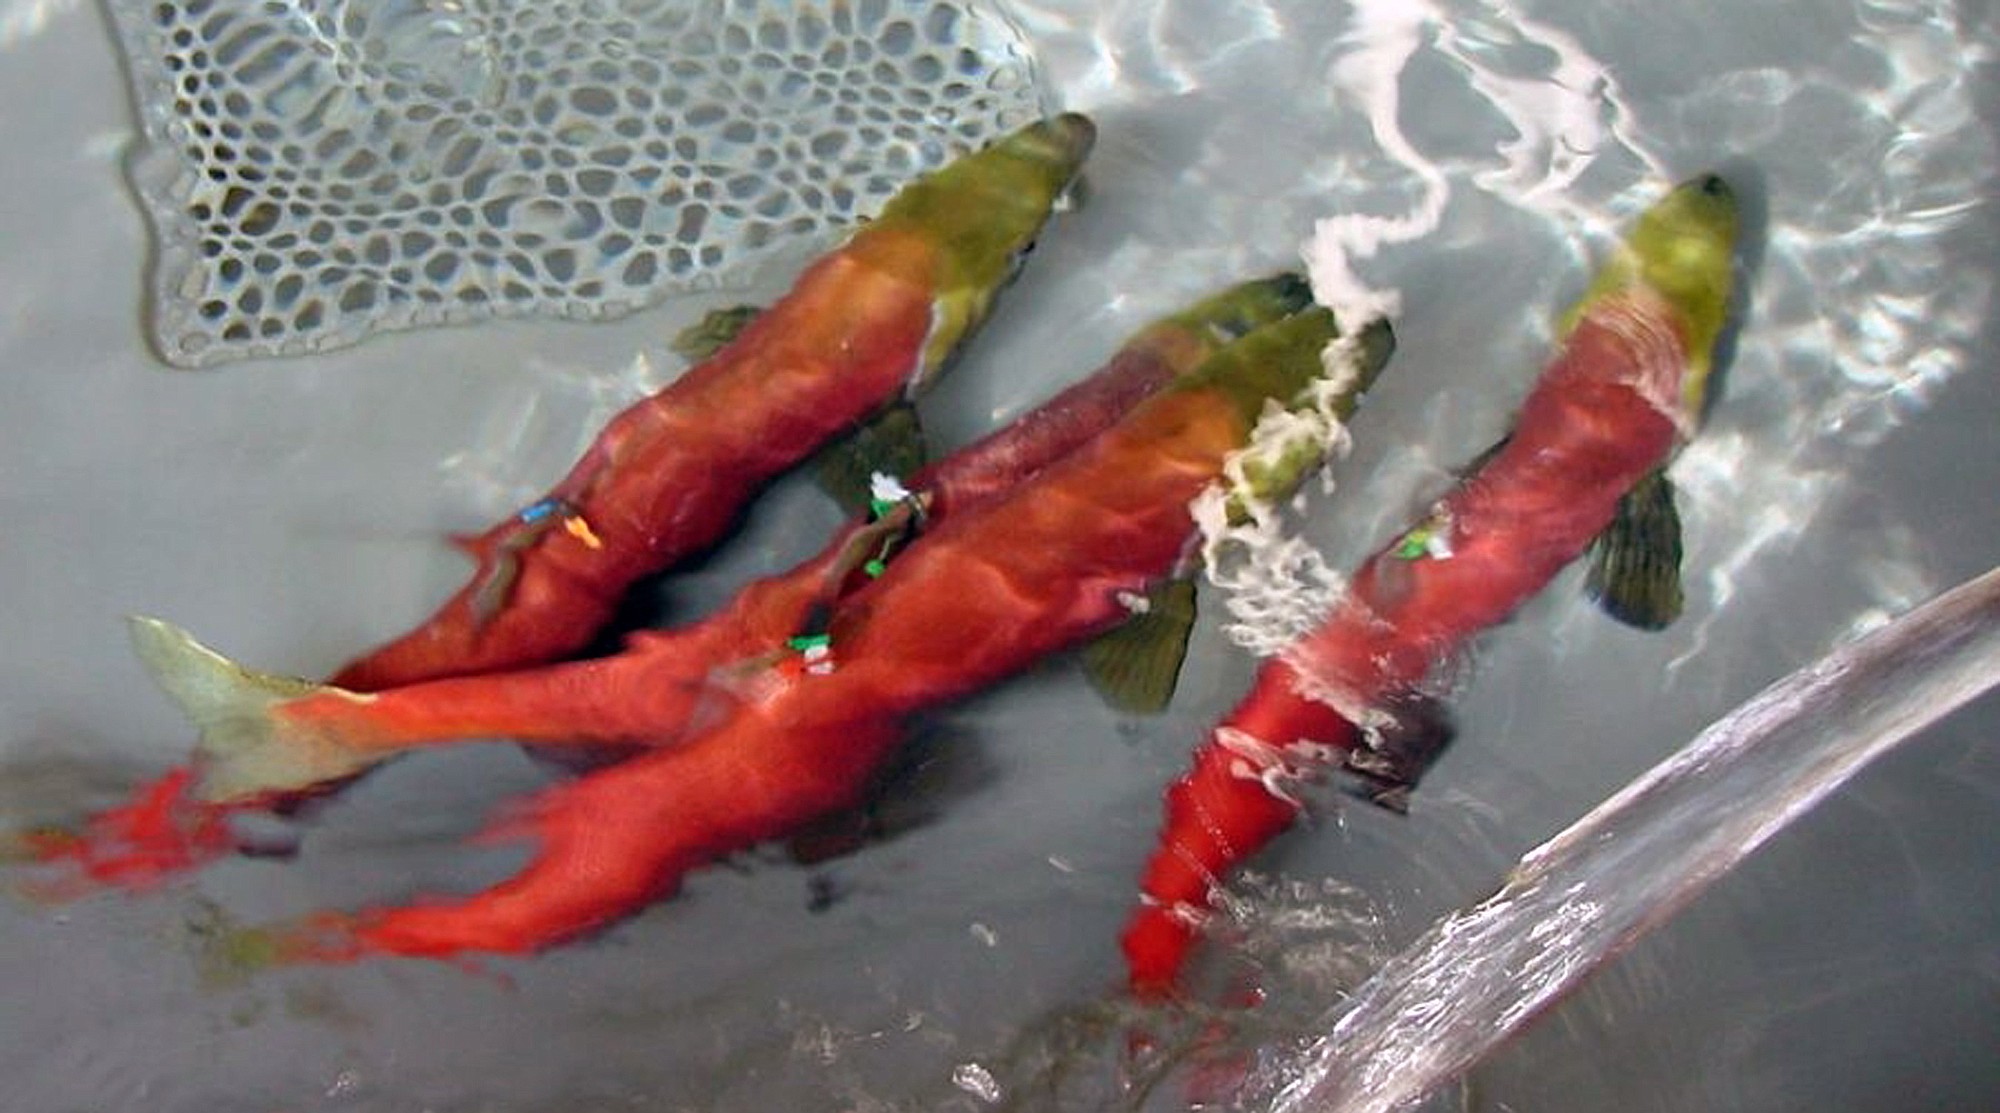 Adult sockeye salmon, in spawning red colors, swim in the Idaho Department of Fish and Game's Eagle Fish Hatchery in Eagle, Idaho, in 2000.